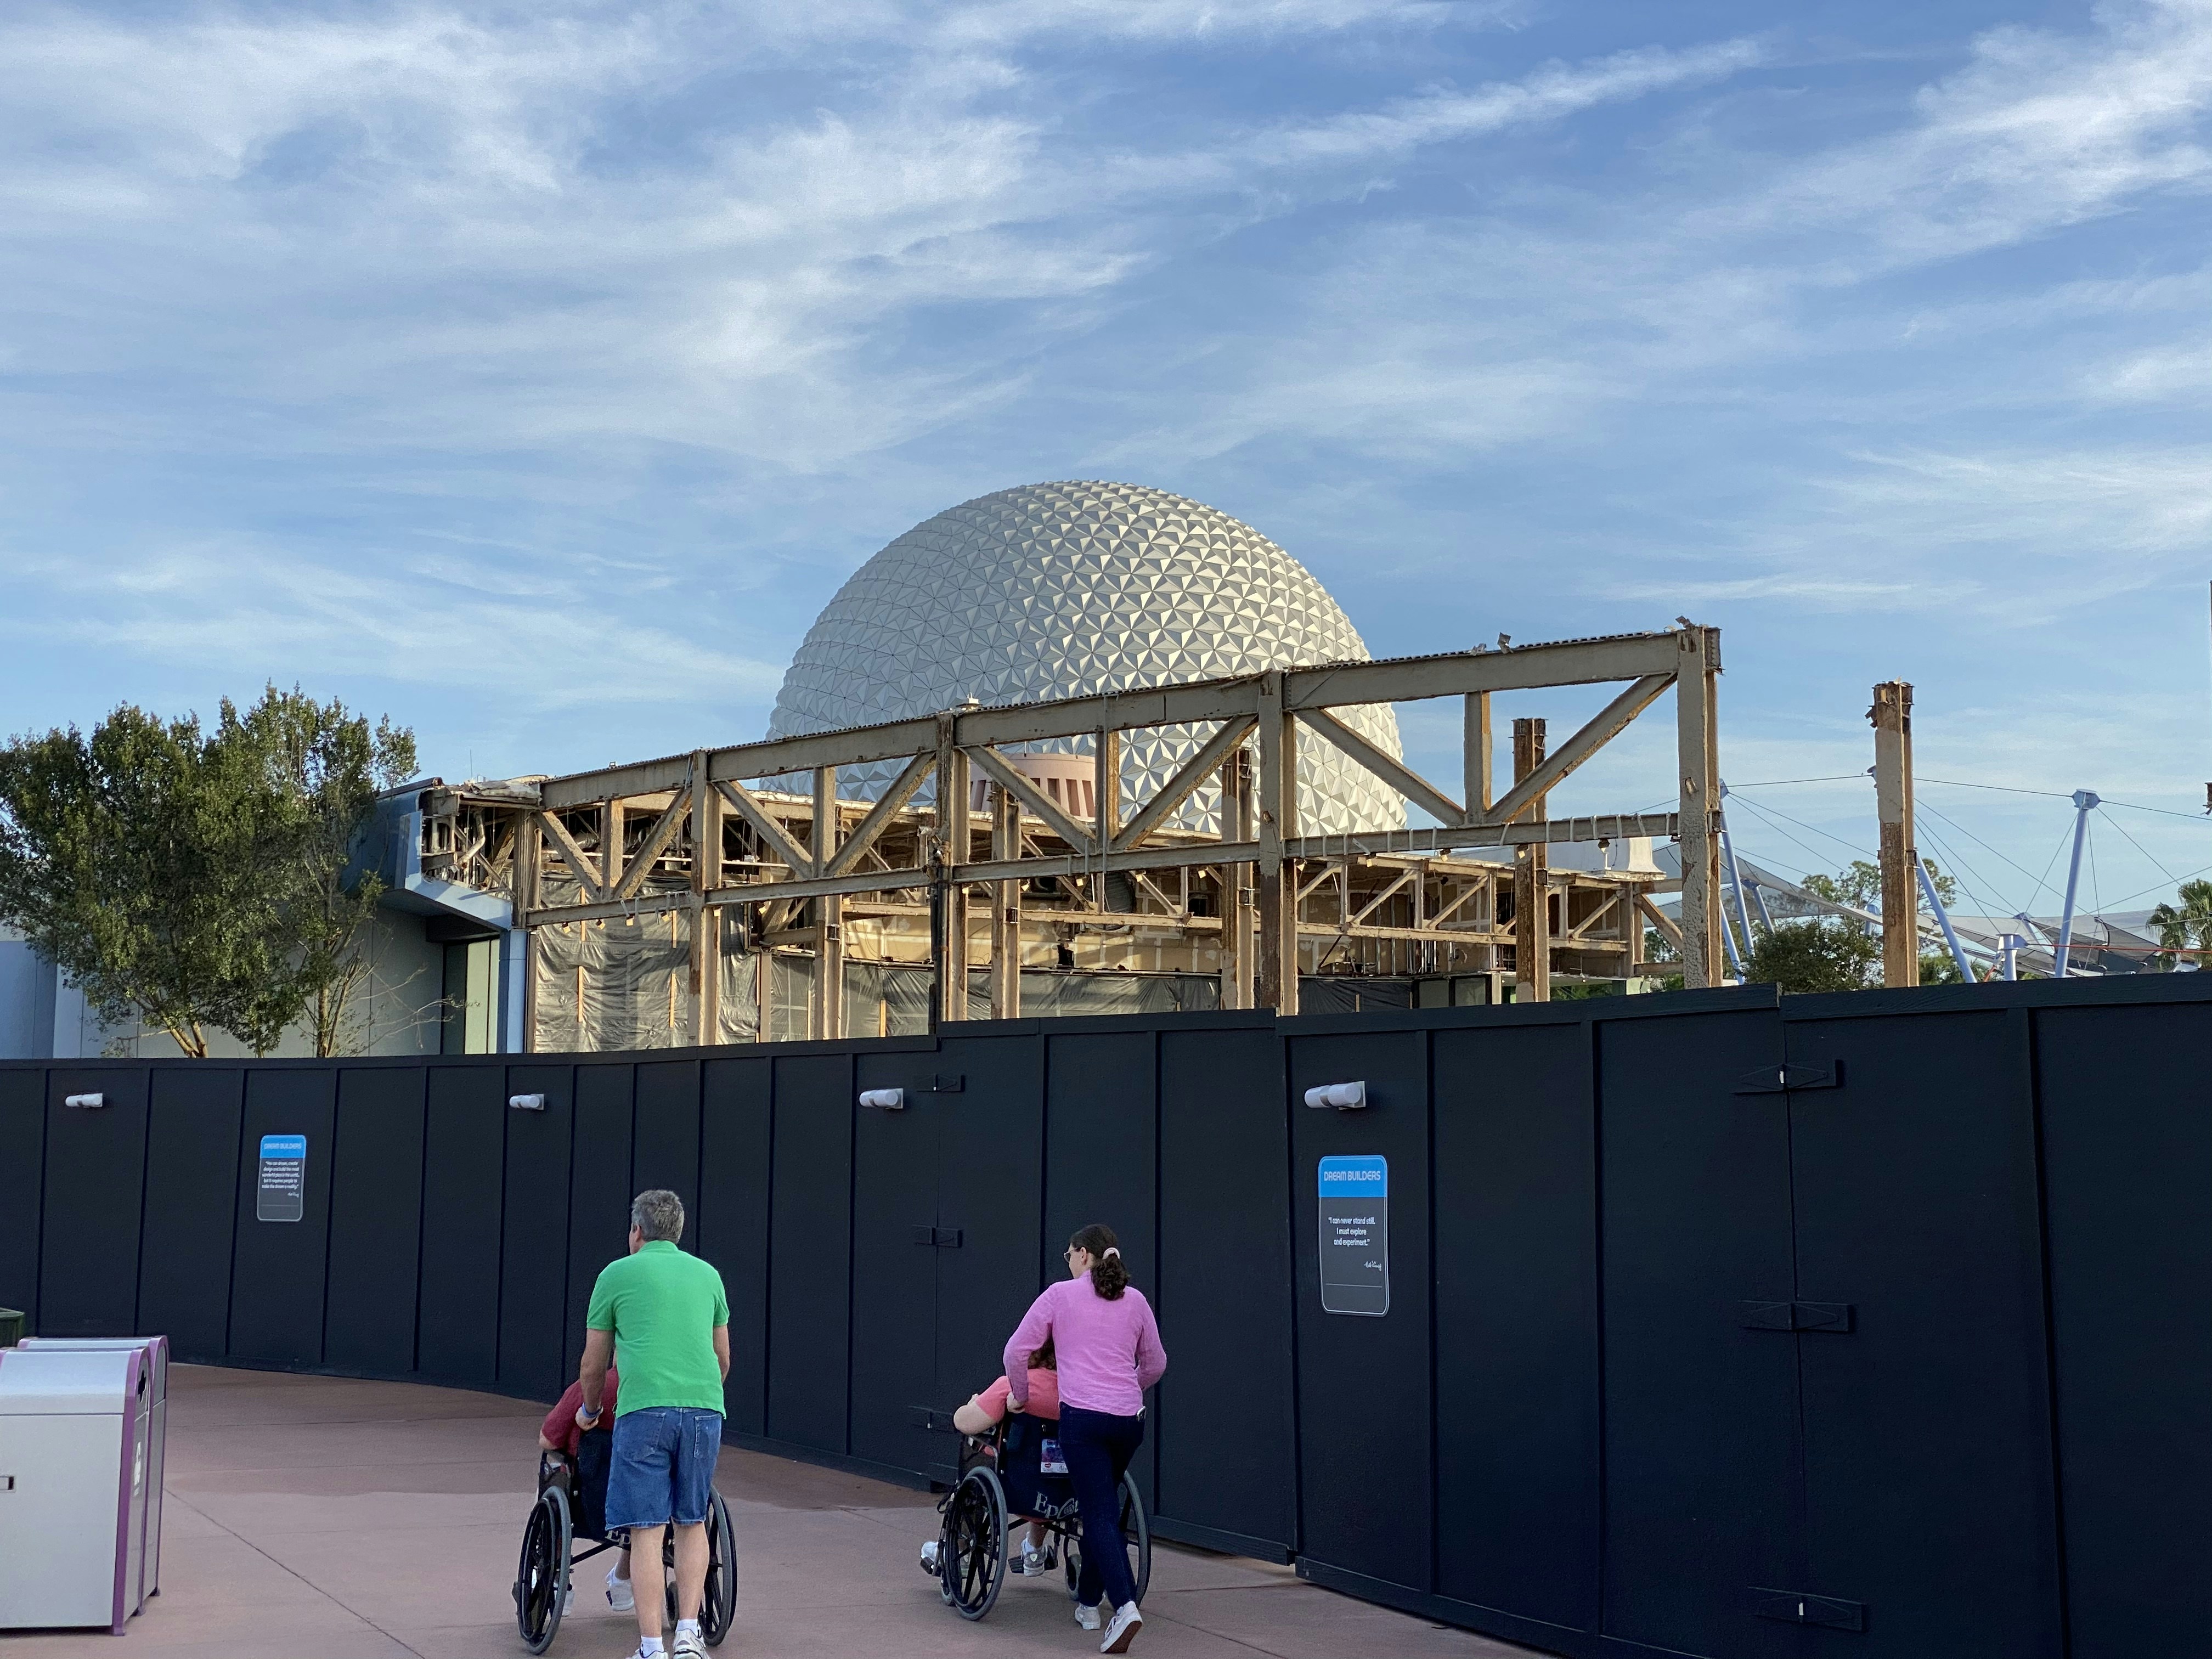 PHOTOS: Last Remaining Segments of Innoventions West as Demolition